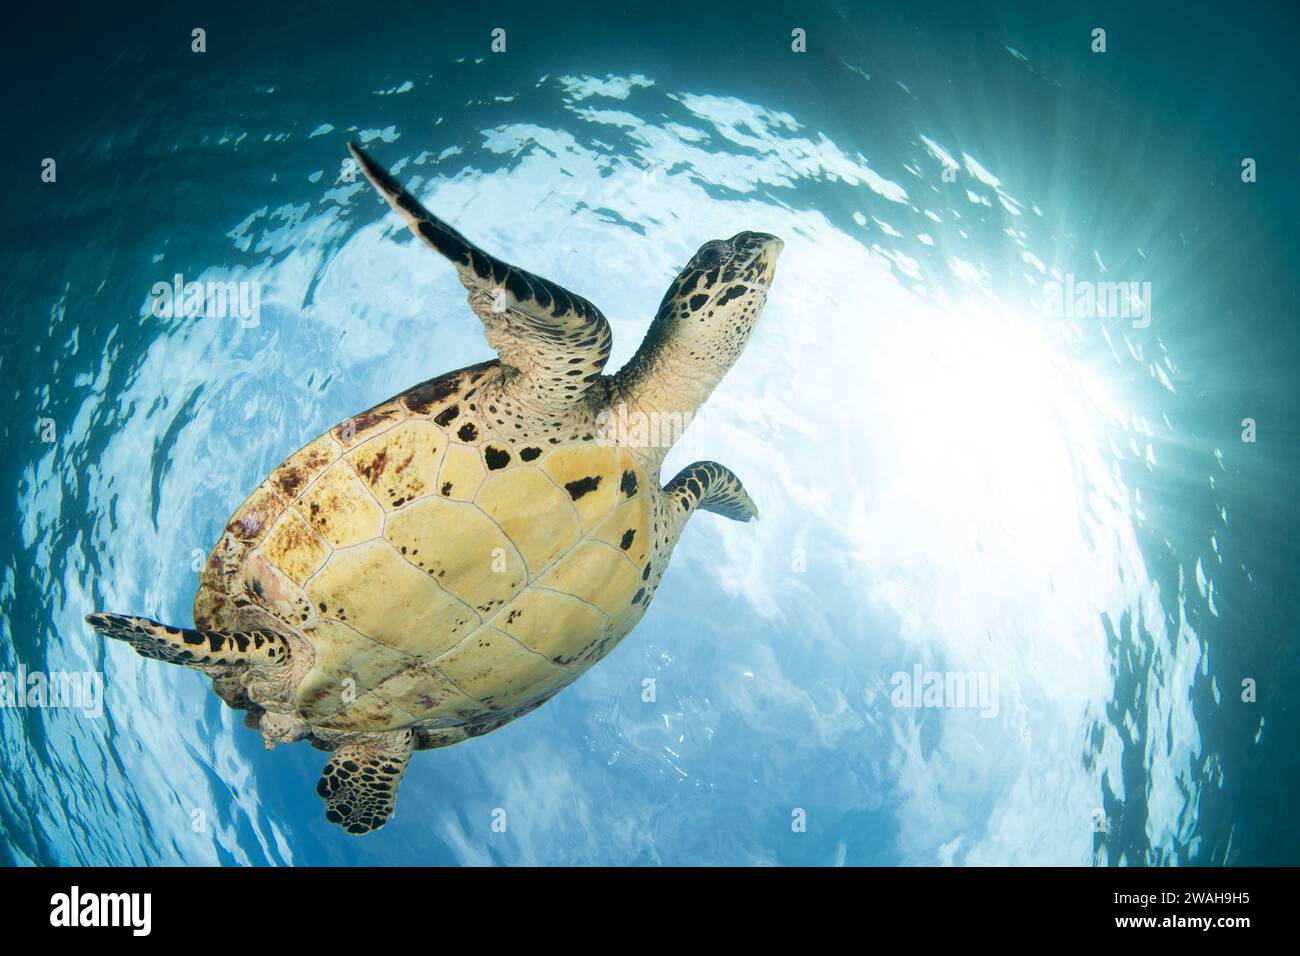 A Hawksbill sea turtle, Eretmochelys imbricata, swims just under the ocean's surface in Raja Ampat. This beautiful reptile is an endangered species. Stock Photo